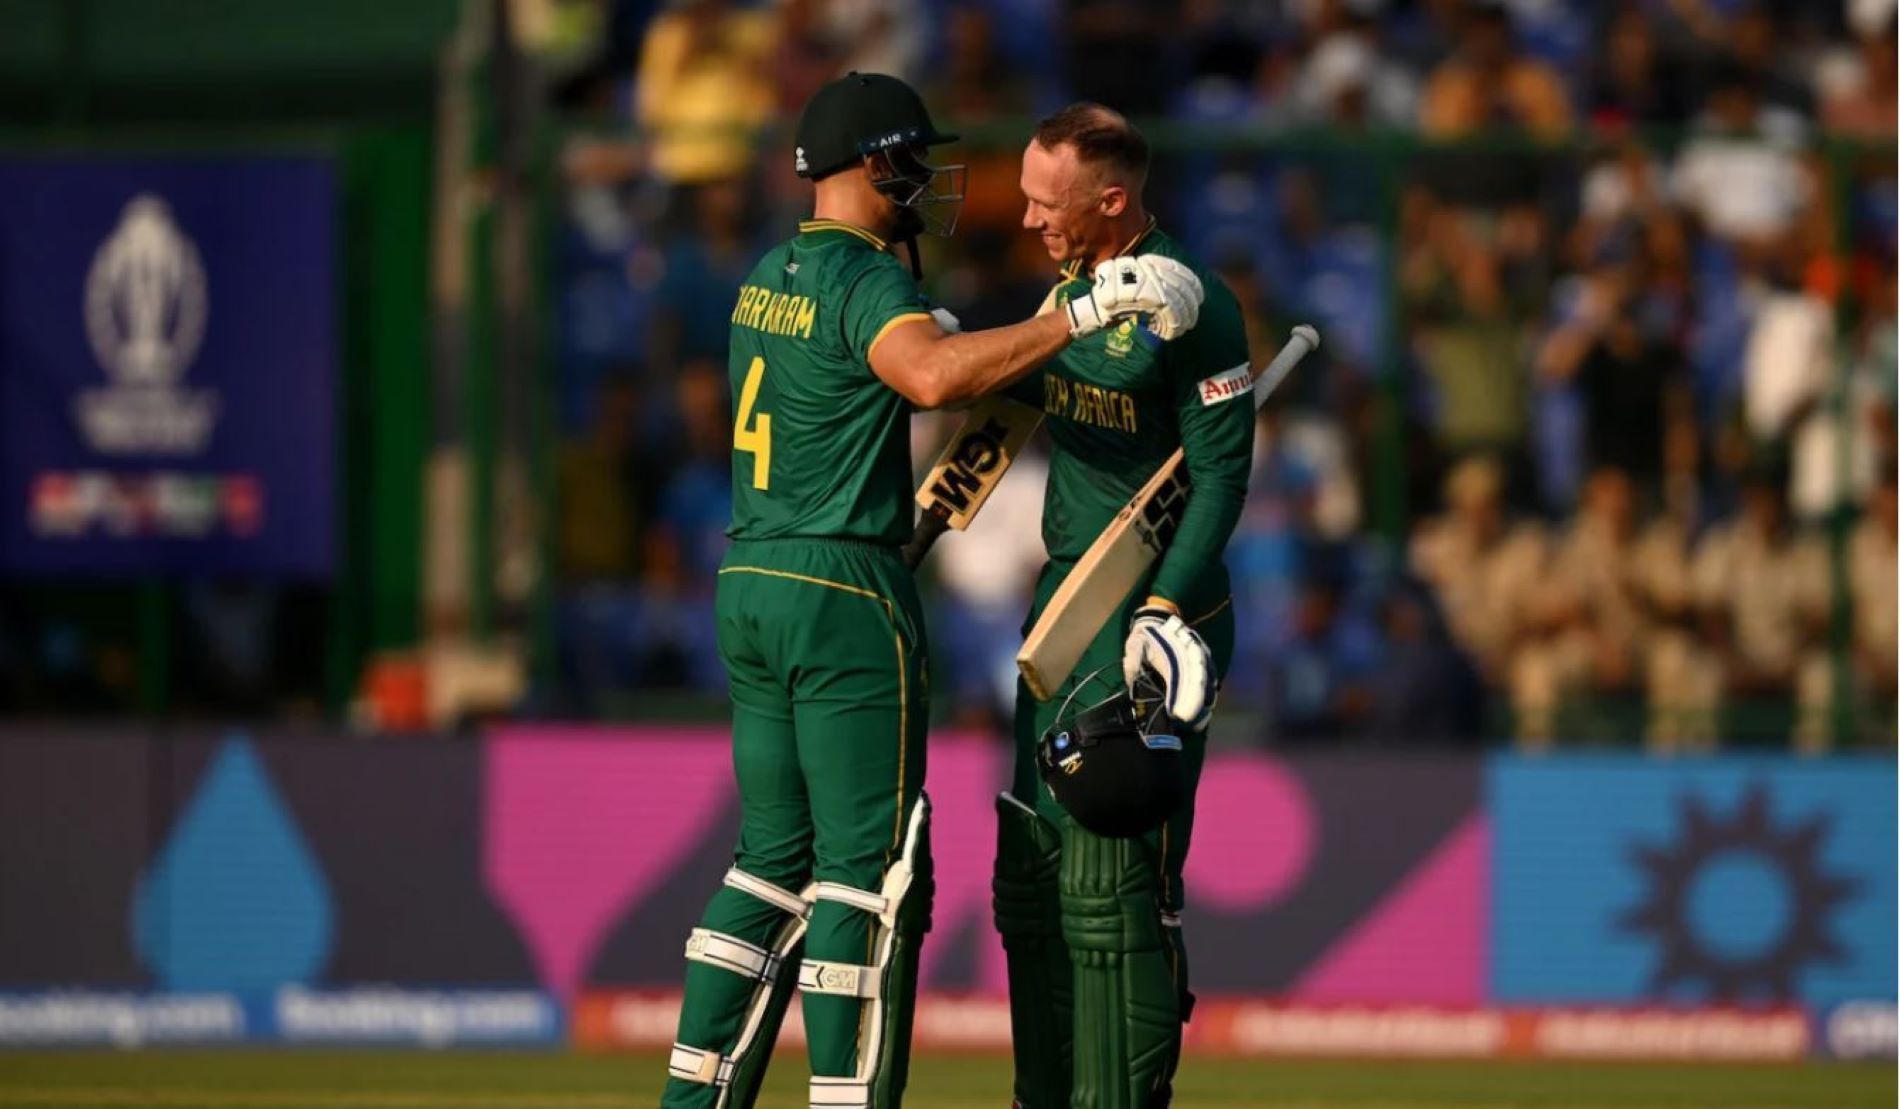 The South African batters made merry against a helpless Sri Lankan attack.